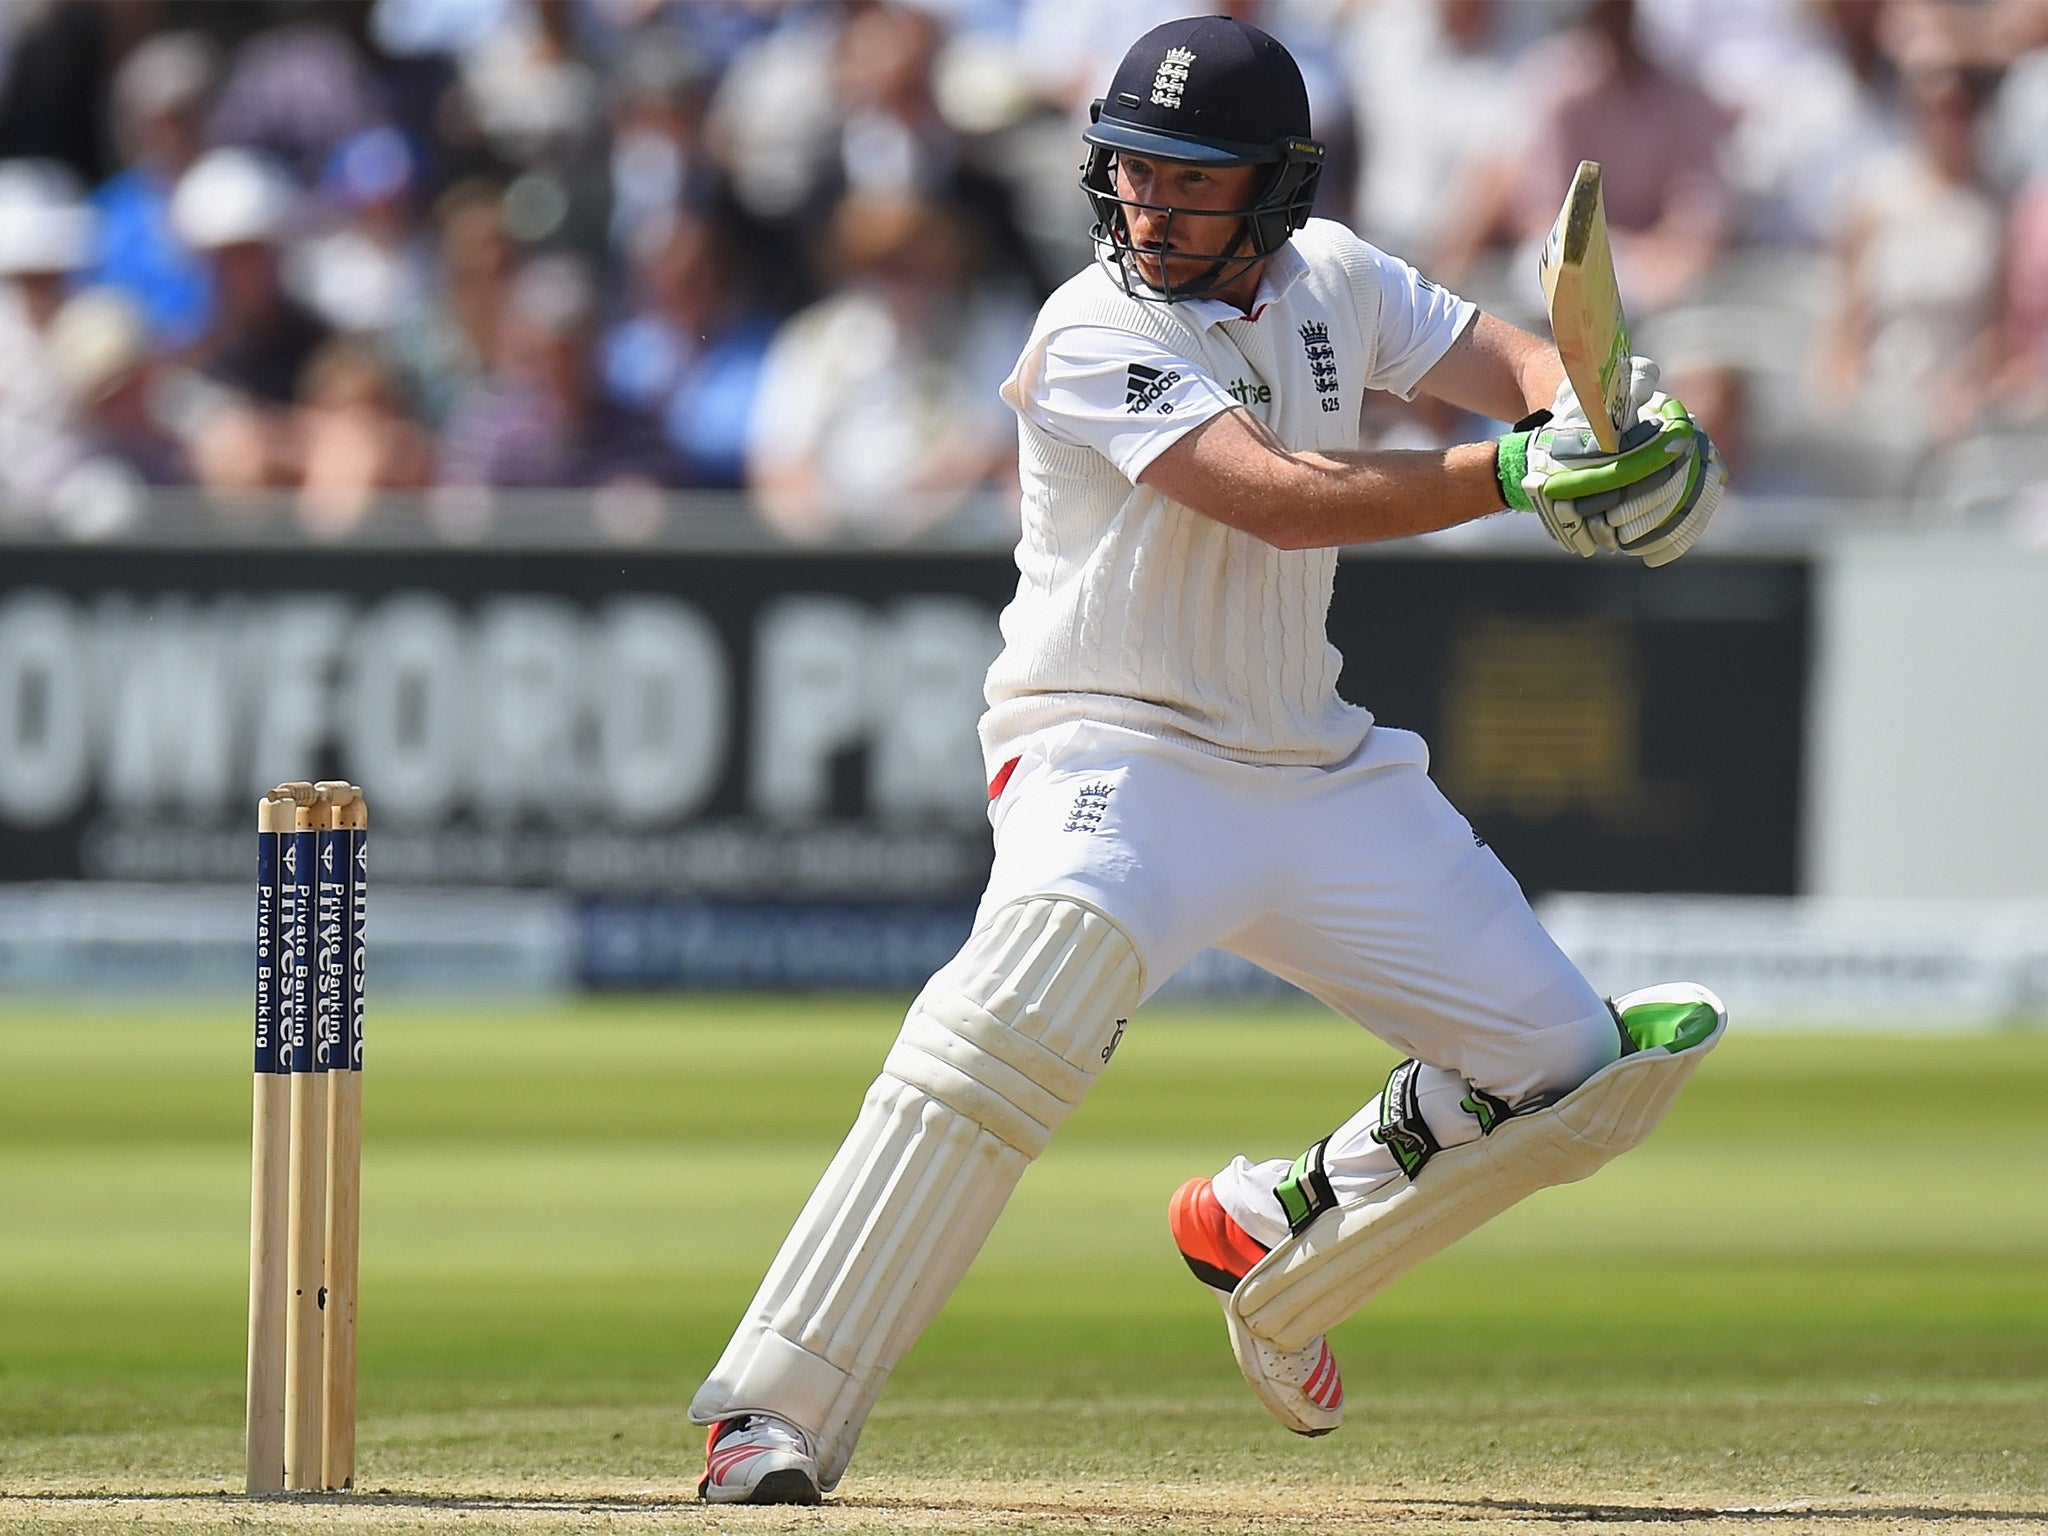 Ian Bell will be promoted to No 3 in the England batting order – a key position in which he has had mixed fortunes